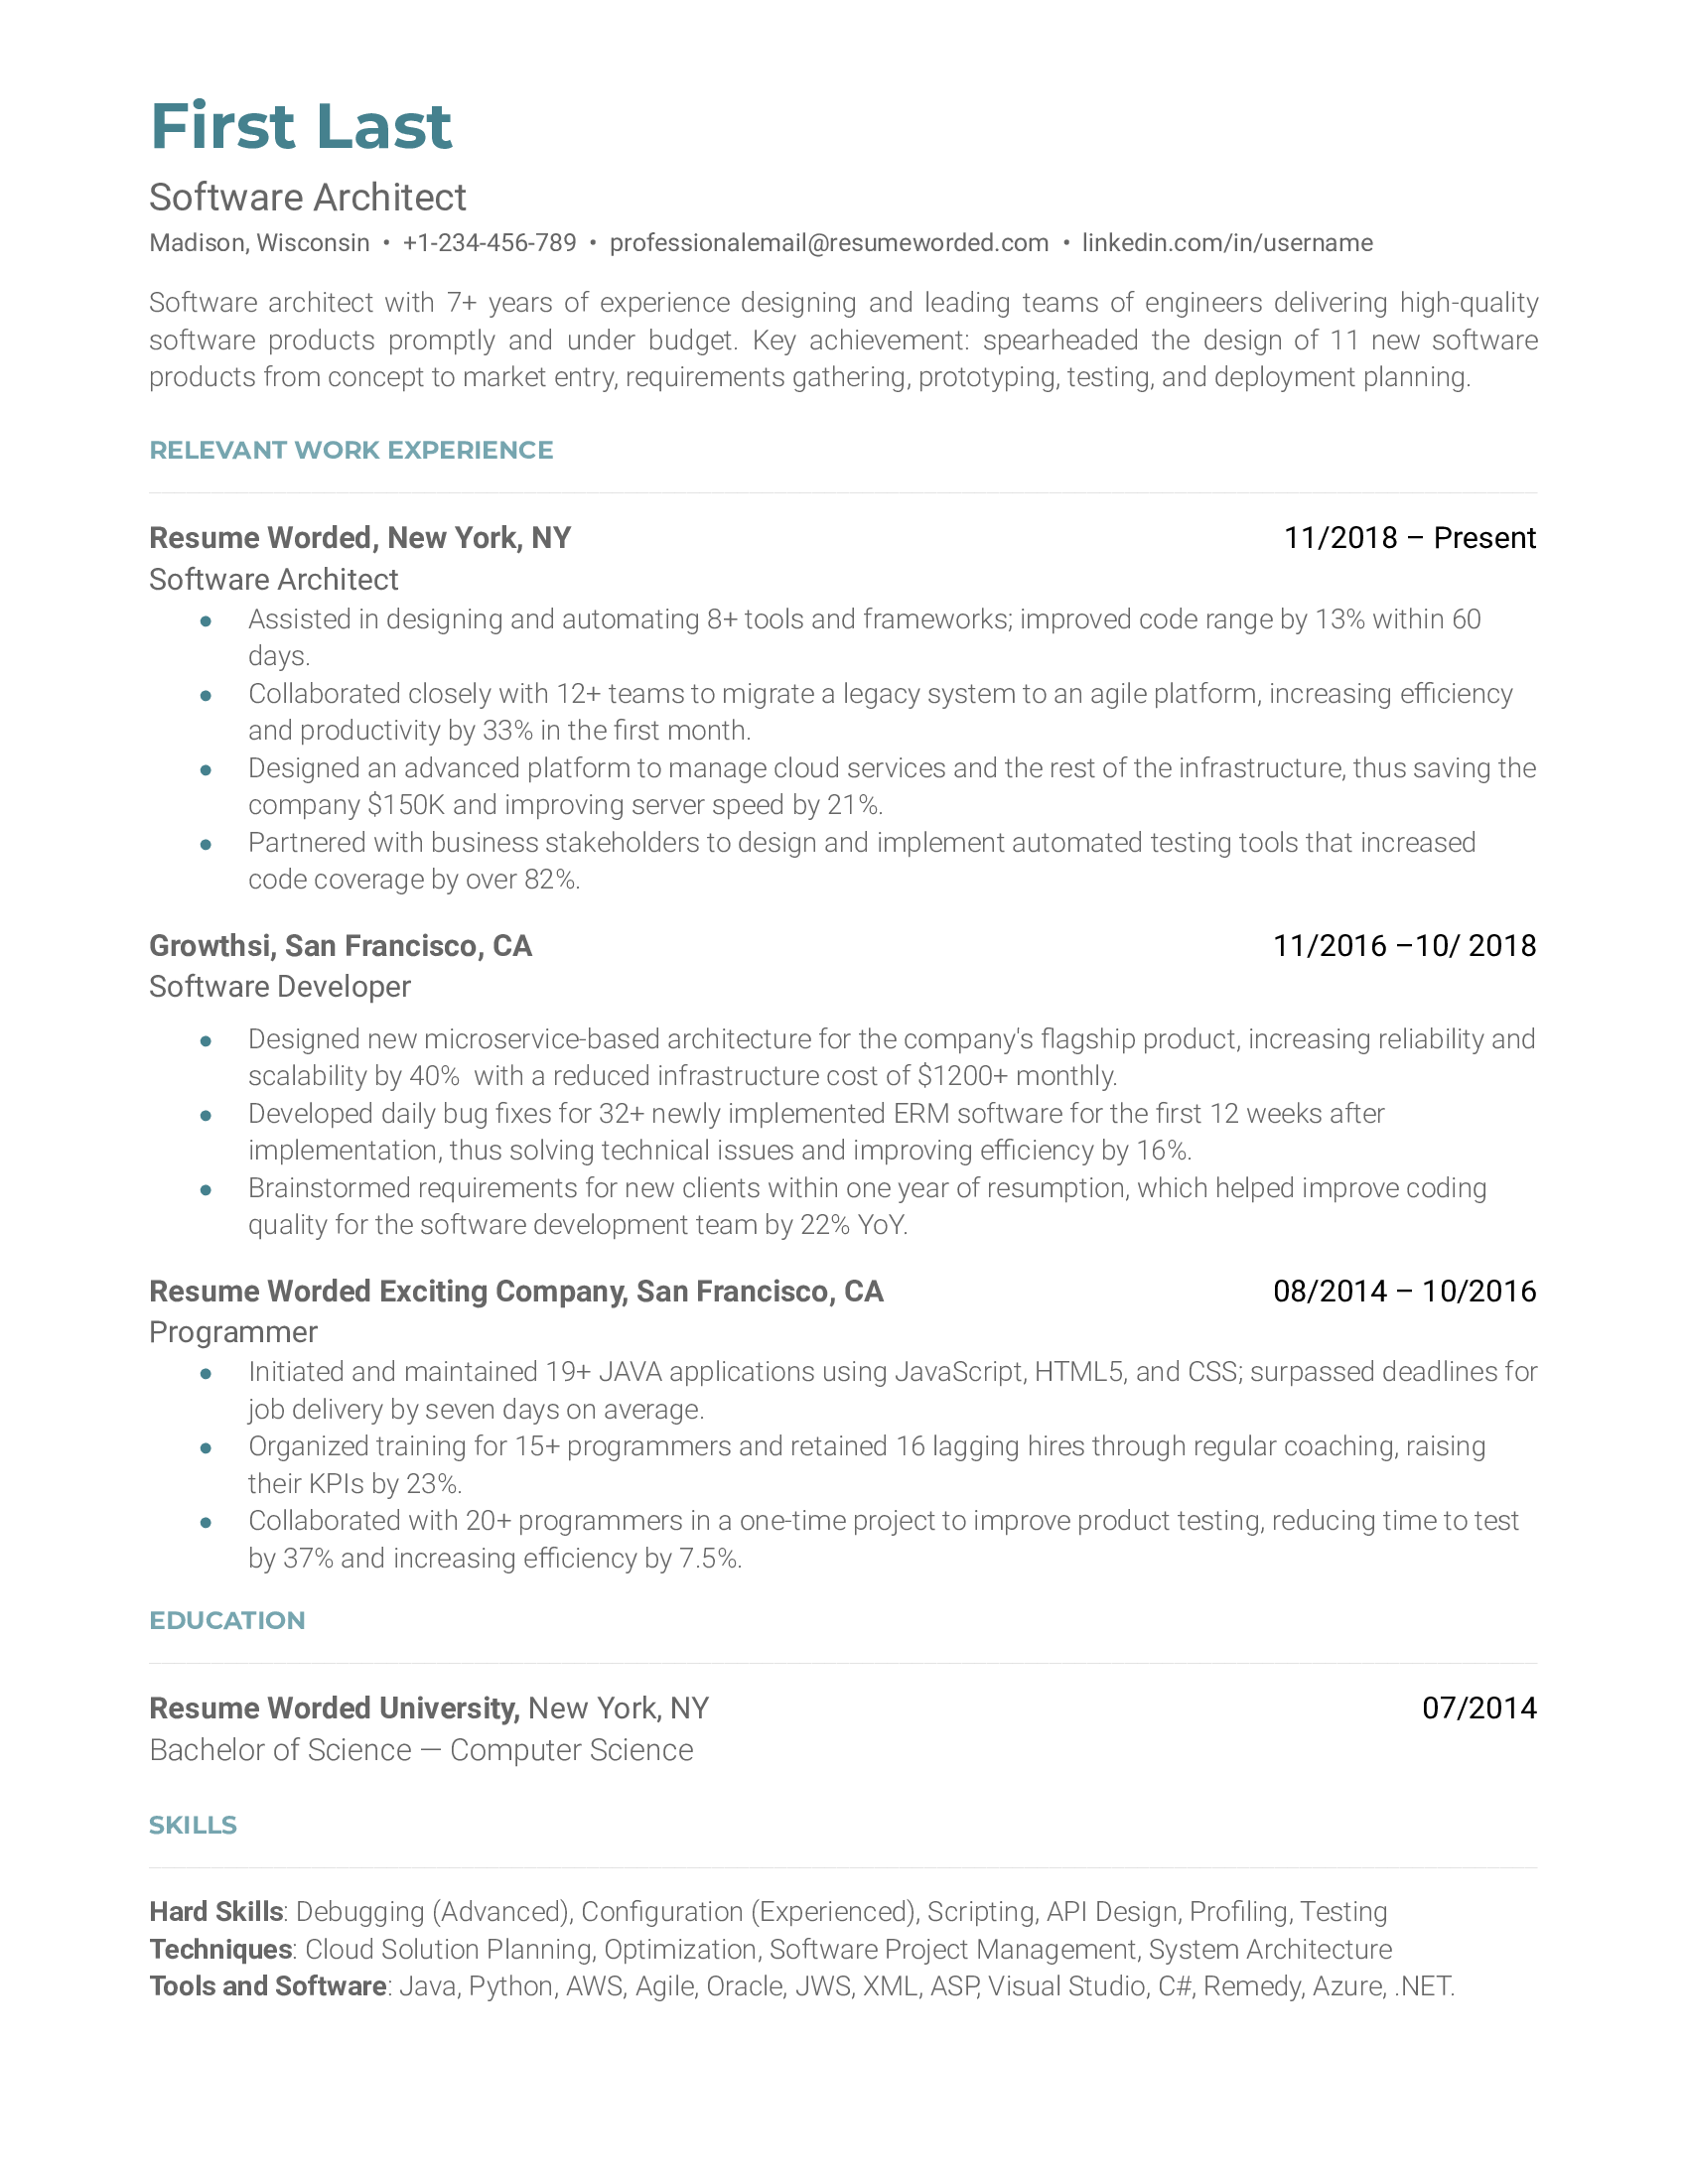 A software architect resume sample that highlights the applicant’s focused skill set and career progression.